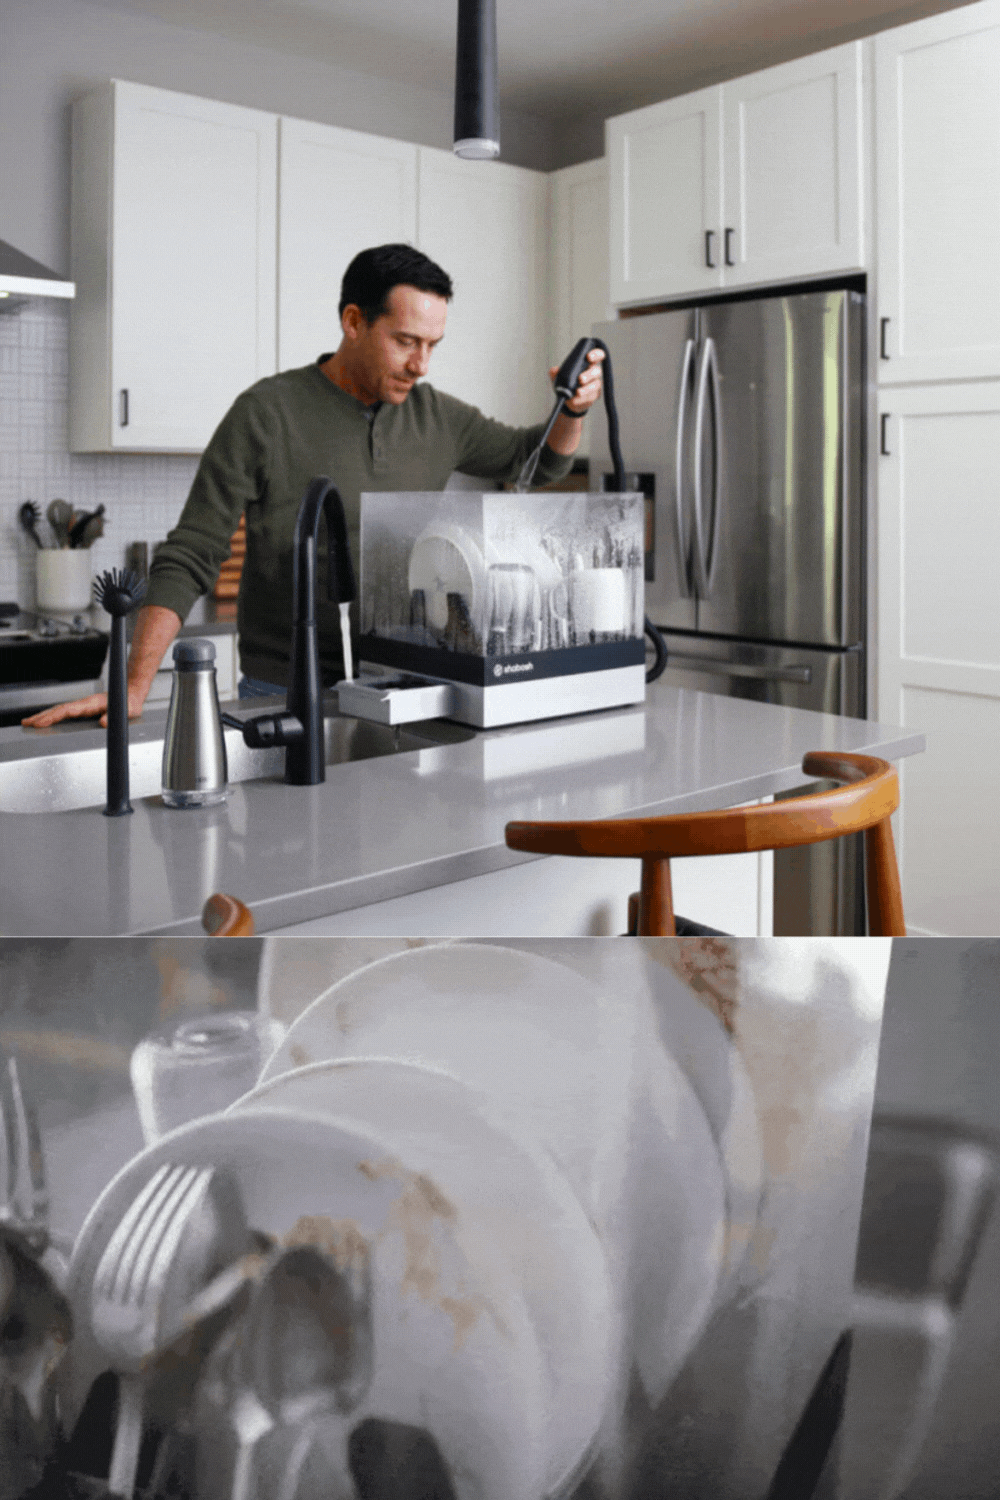 Shabosh Portable Dishwasher Cleans Dishes in 40 Seconds